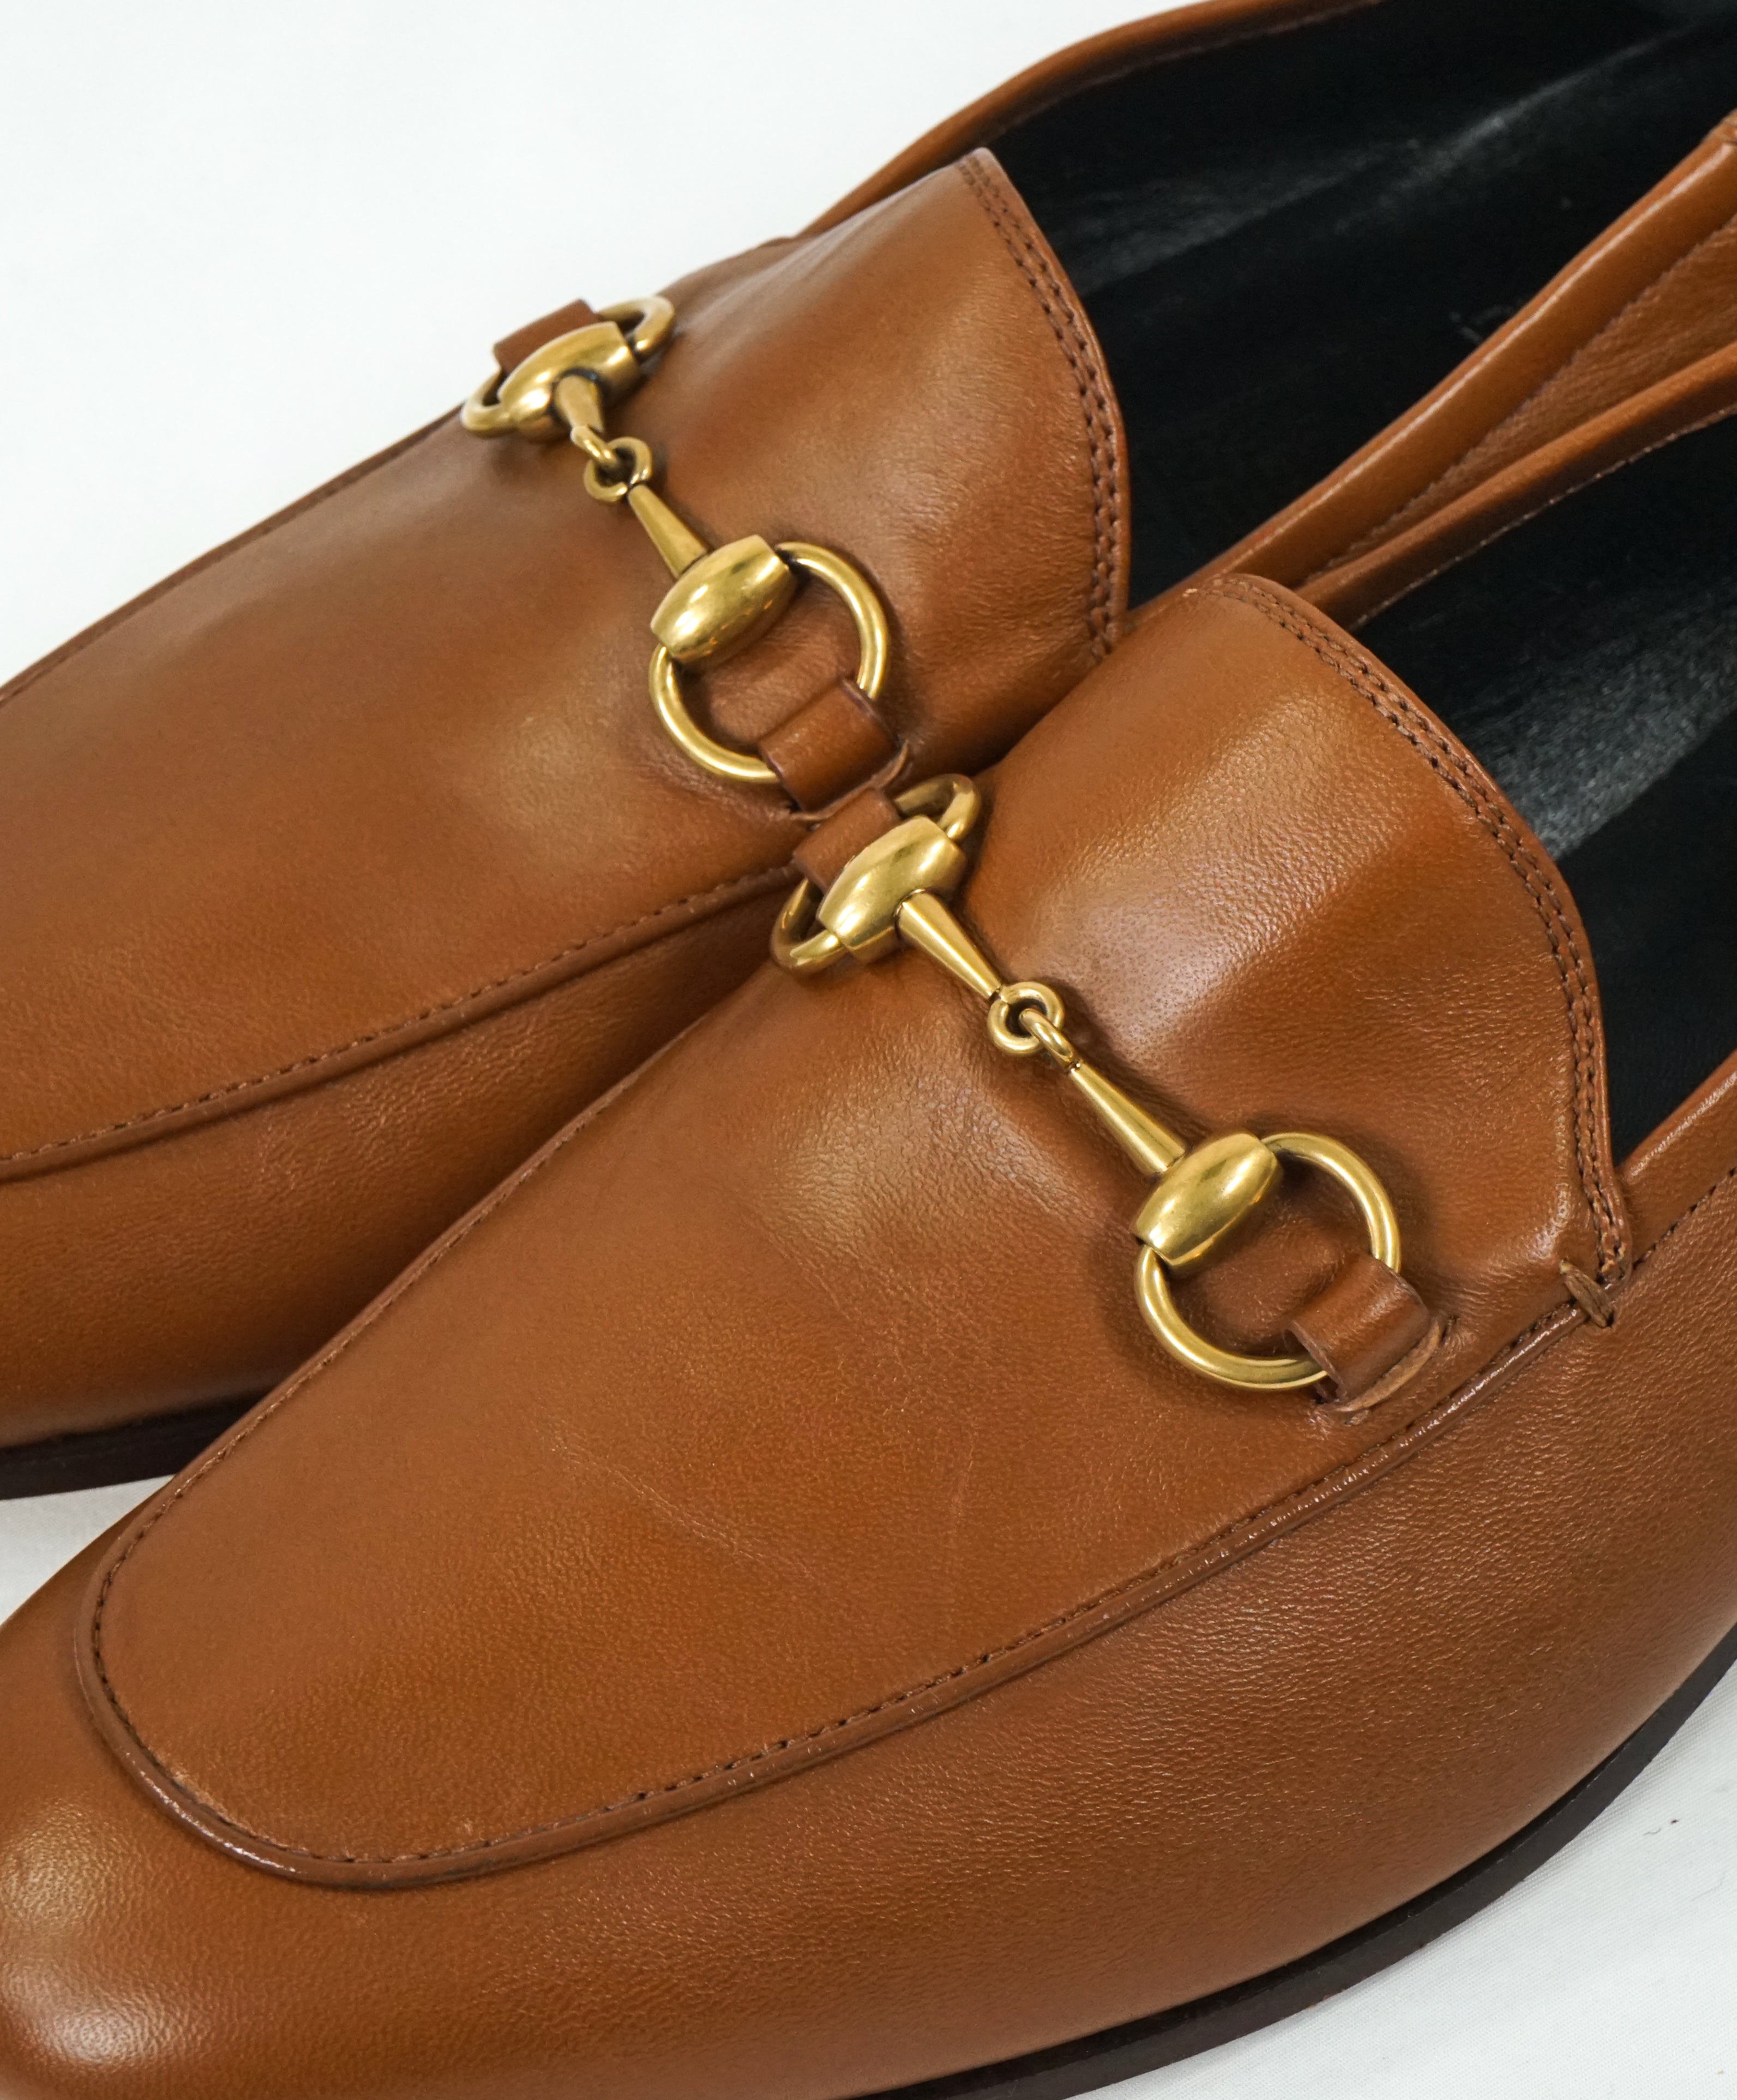 gucci brixton loafer brown